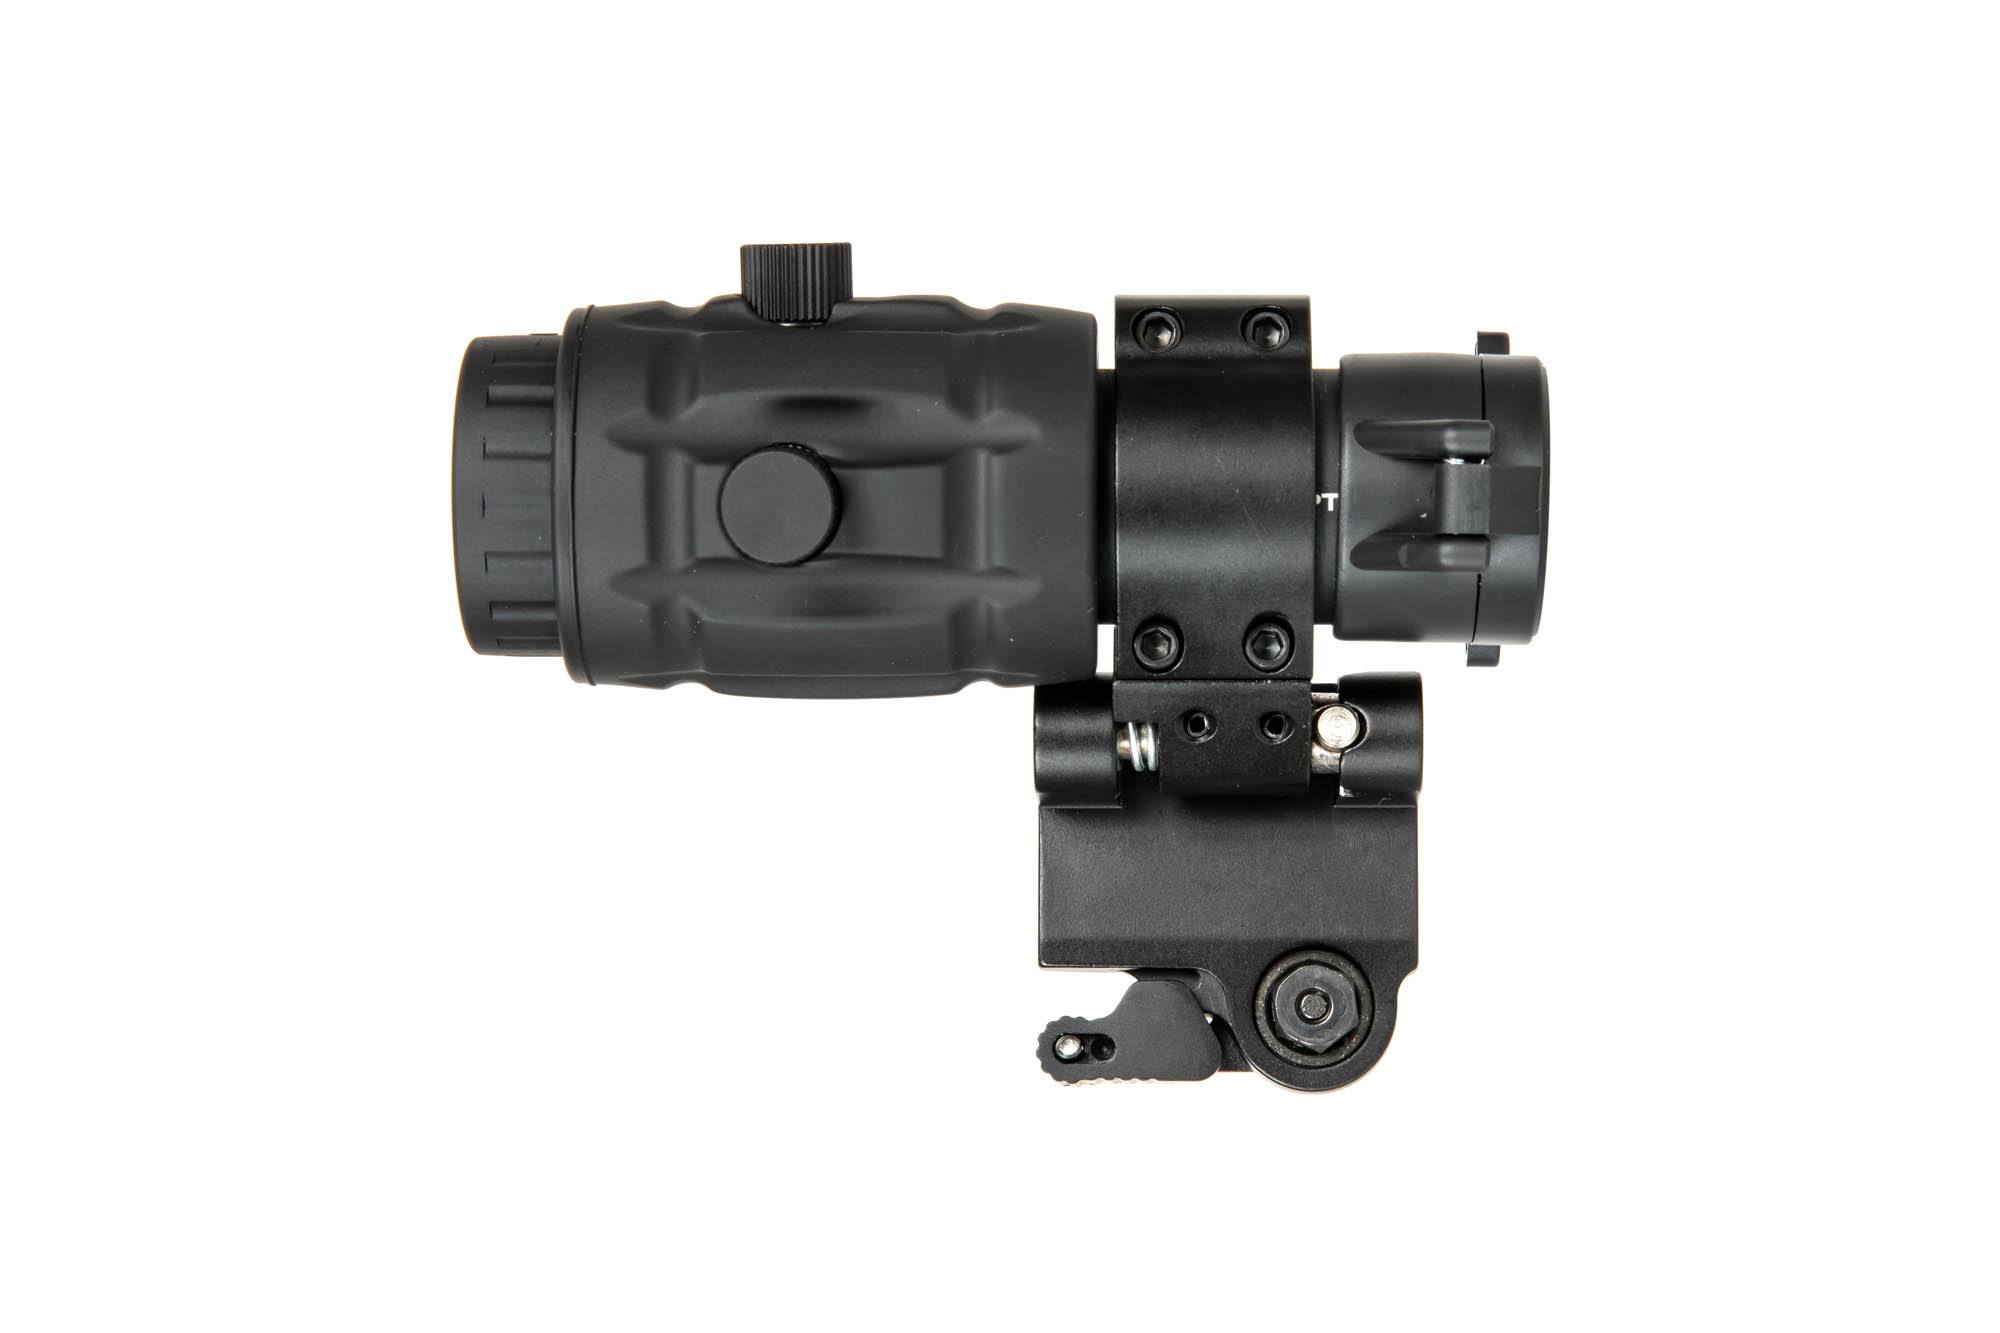 SCOT-07 3X Magnifier with QD mount by Vector Optics on Airsoft Mania Europe